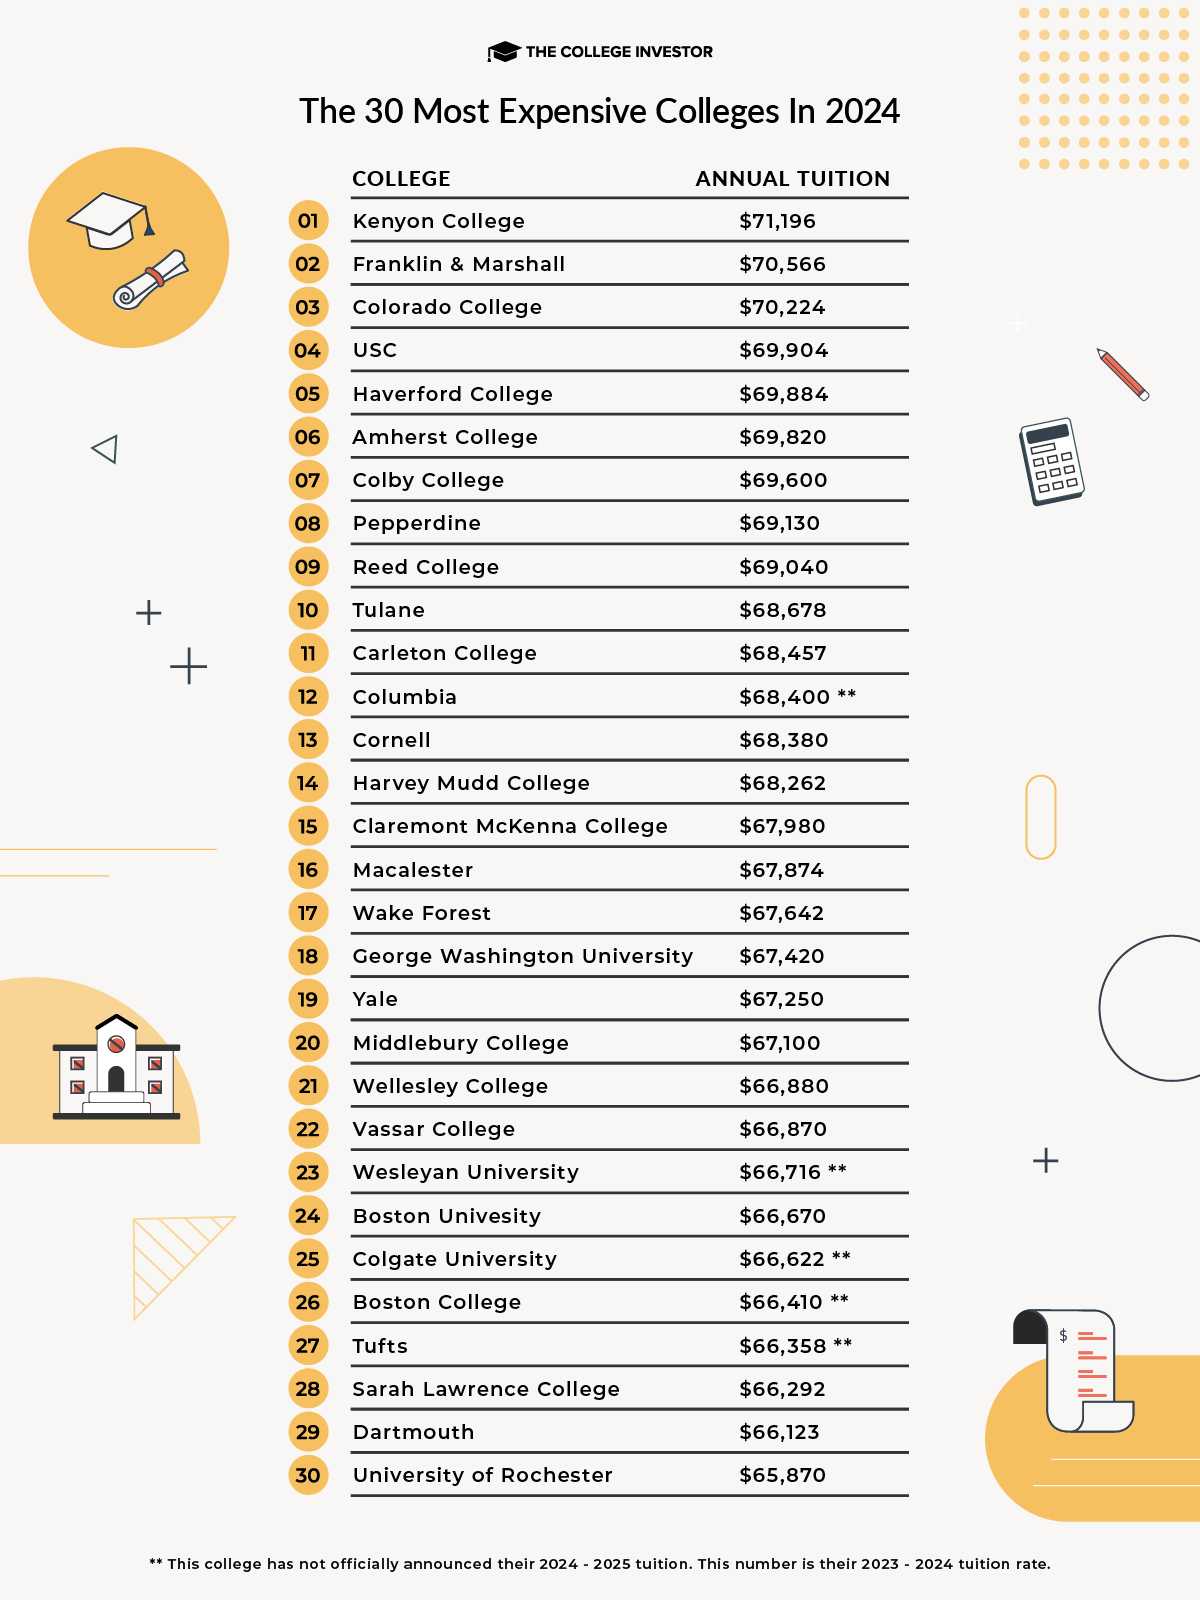 Most Expensive Colleges In 2024 Infographic